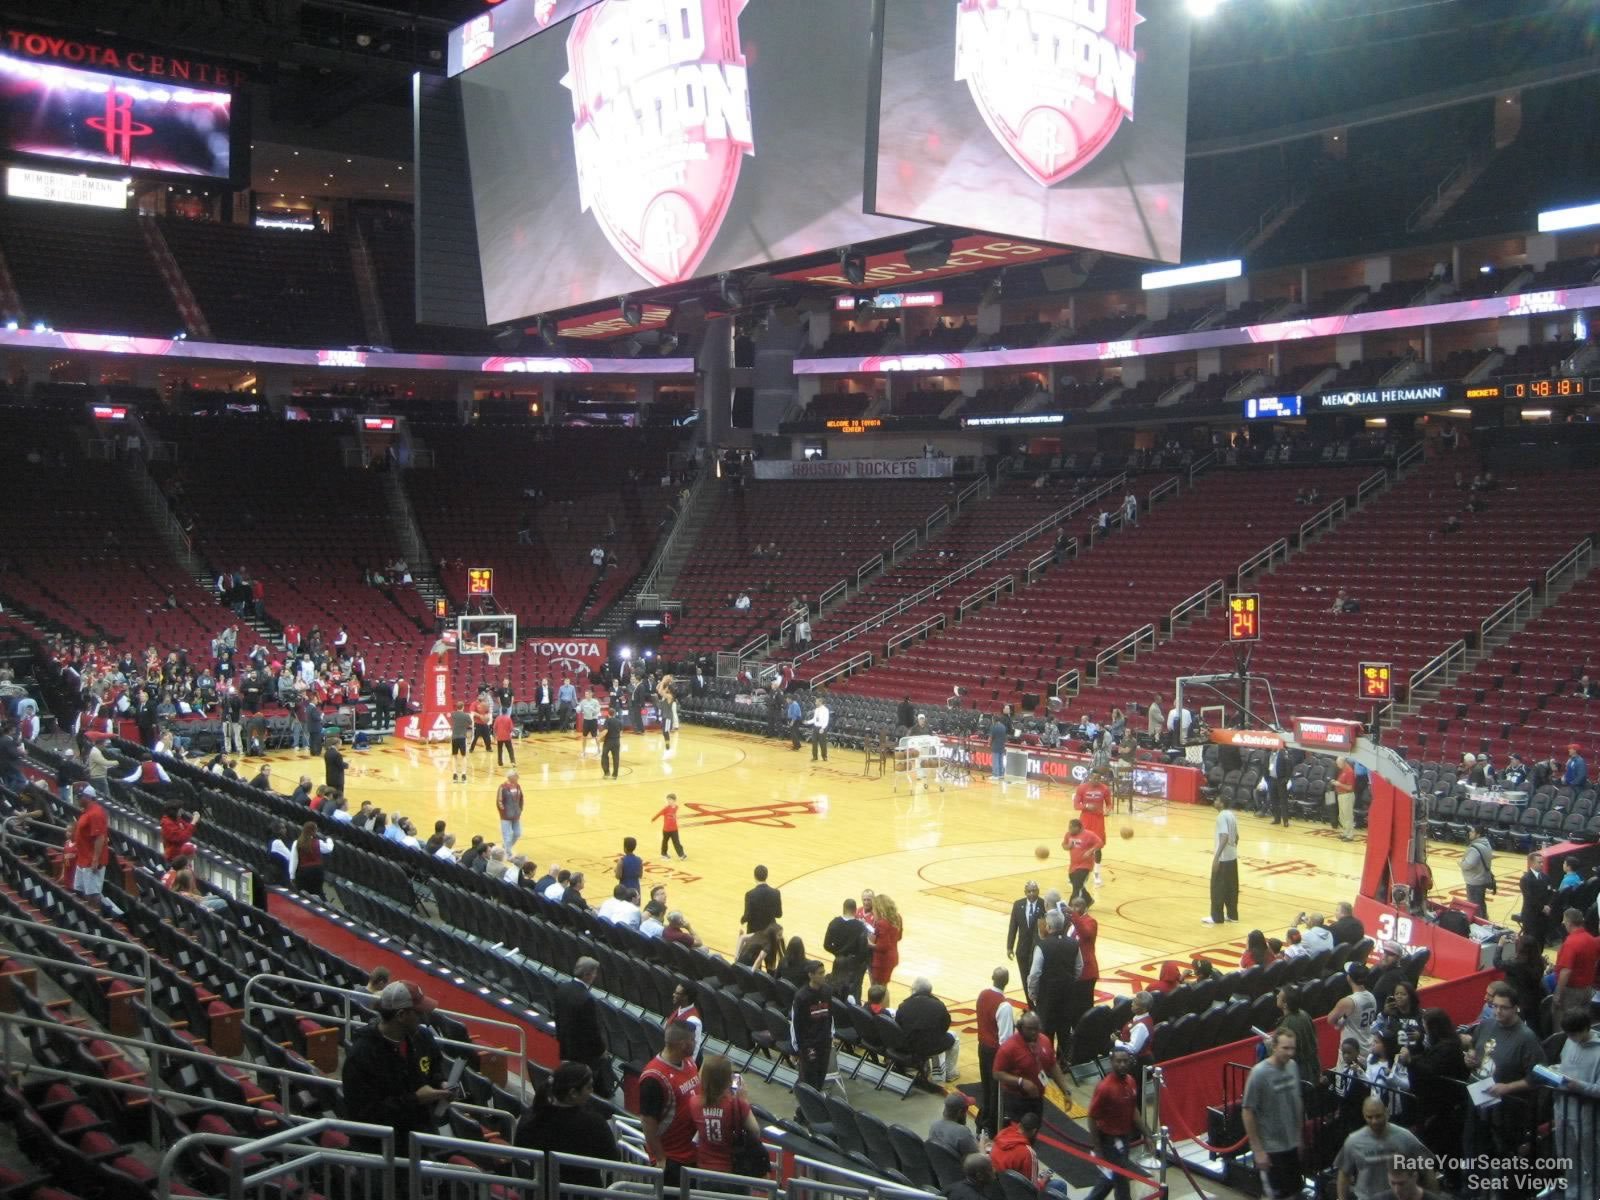 section 103, row 14 seat view  for basketball - toyota center